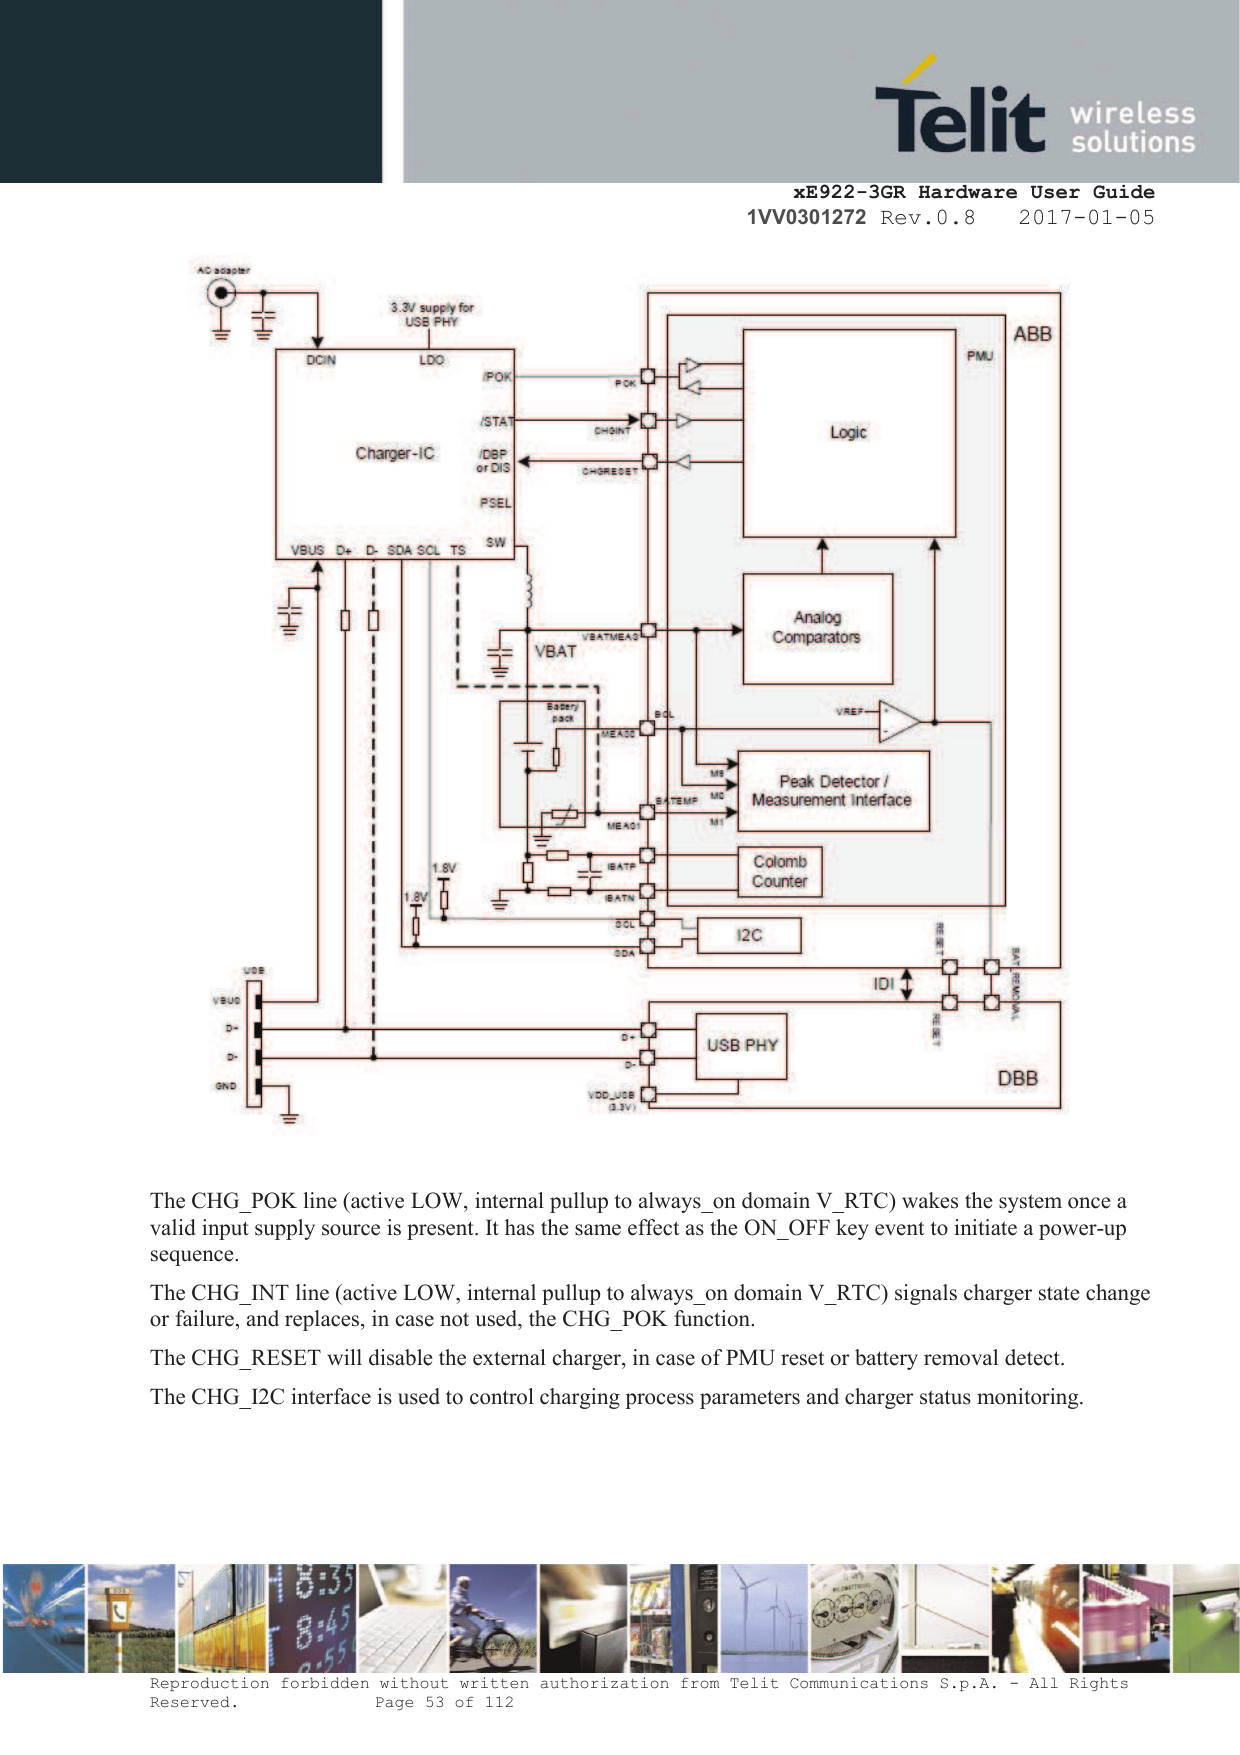     xE922-3GR Hardware User Guide 1VV0301272 Rev.0.8   2017-01-05 Reproduction forbidden without written authorization from Telit Communications S.p.A. - All Rights Reserved.    Page 53 of 112    The CHG_POK line (active LOW, internal pullup to always_on domain V_RTC) wakes the system once a valid input supply source is present. It has the same effect as the ON_OFF key event to initiate a power-up sequence. The CHG_INT line (active LOW, internal pullup to always_on domain V_RTC) signals charger state change or failure, and replaces, in case not used, the CHG_POK function. The CHG_RESET will disable the external charger, in case of PMU reset or battery removal detect. The CHG_I2C interface is used to control charging process parameters and charger status monitoring.   